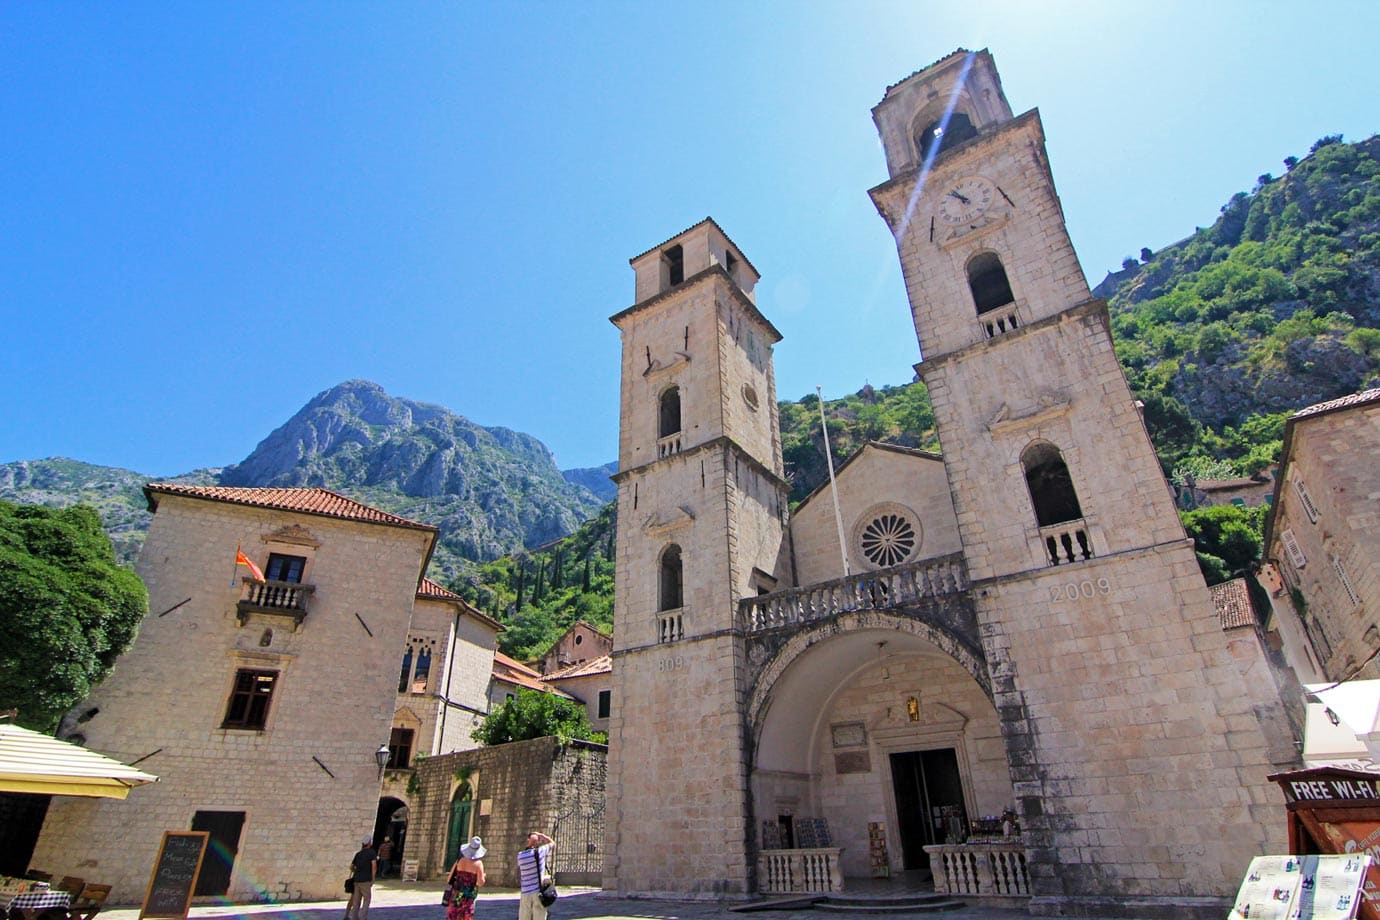 As you lose yourself in Kotor, the mountains are an ever present reminder of where you are